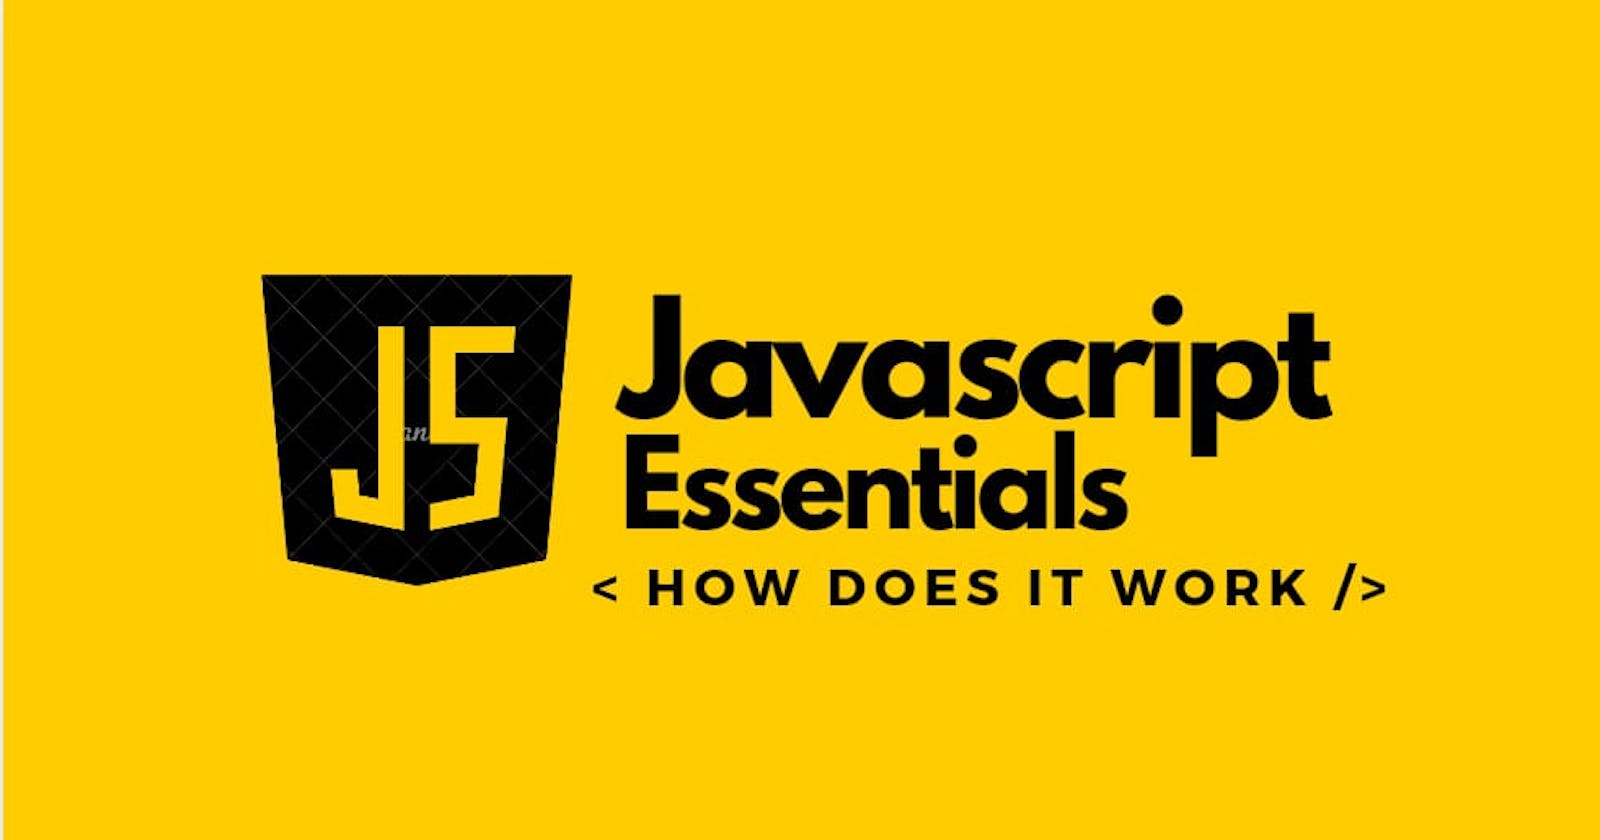 JavaScript Essentials | How does it work?